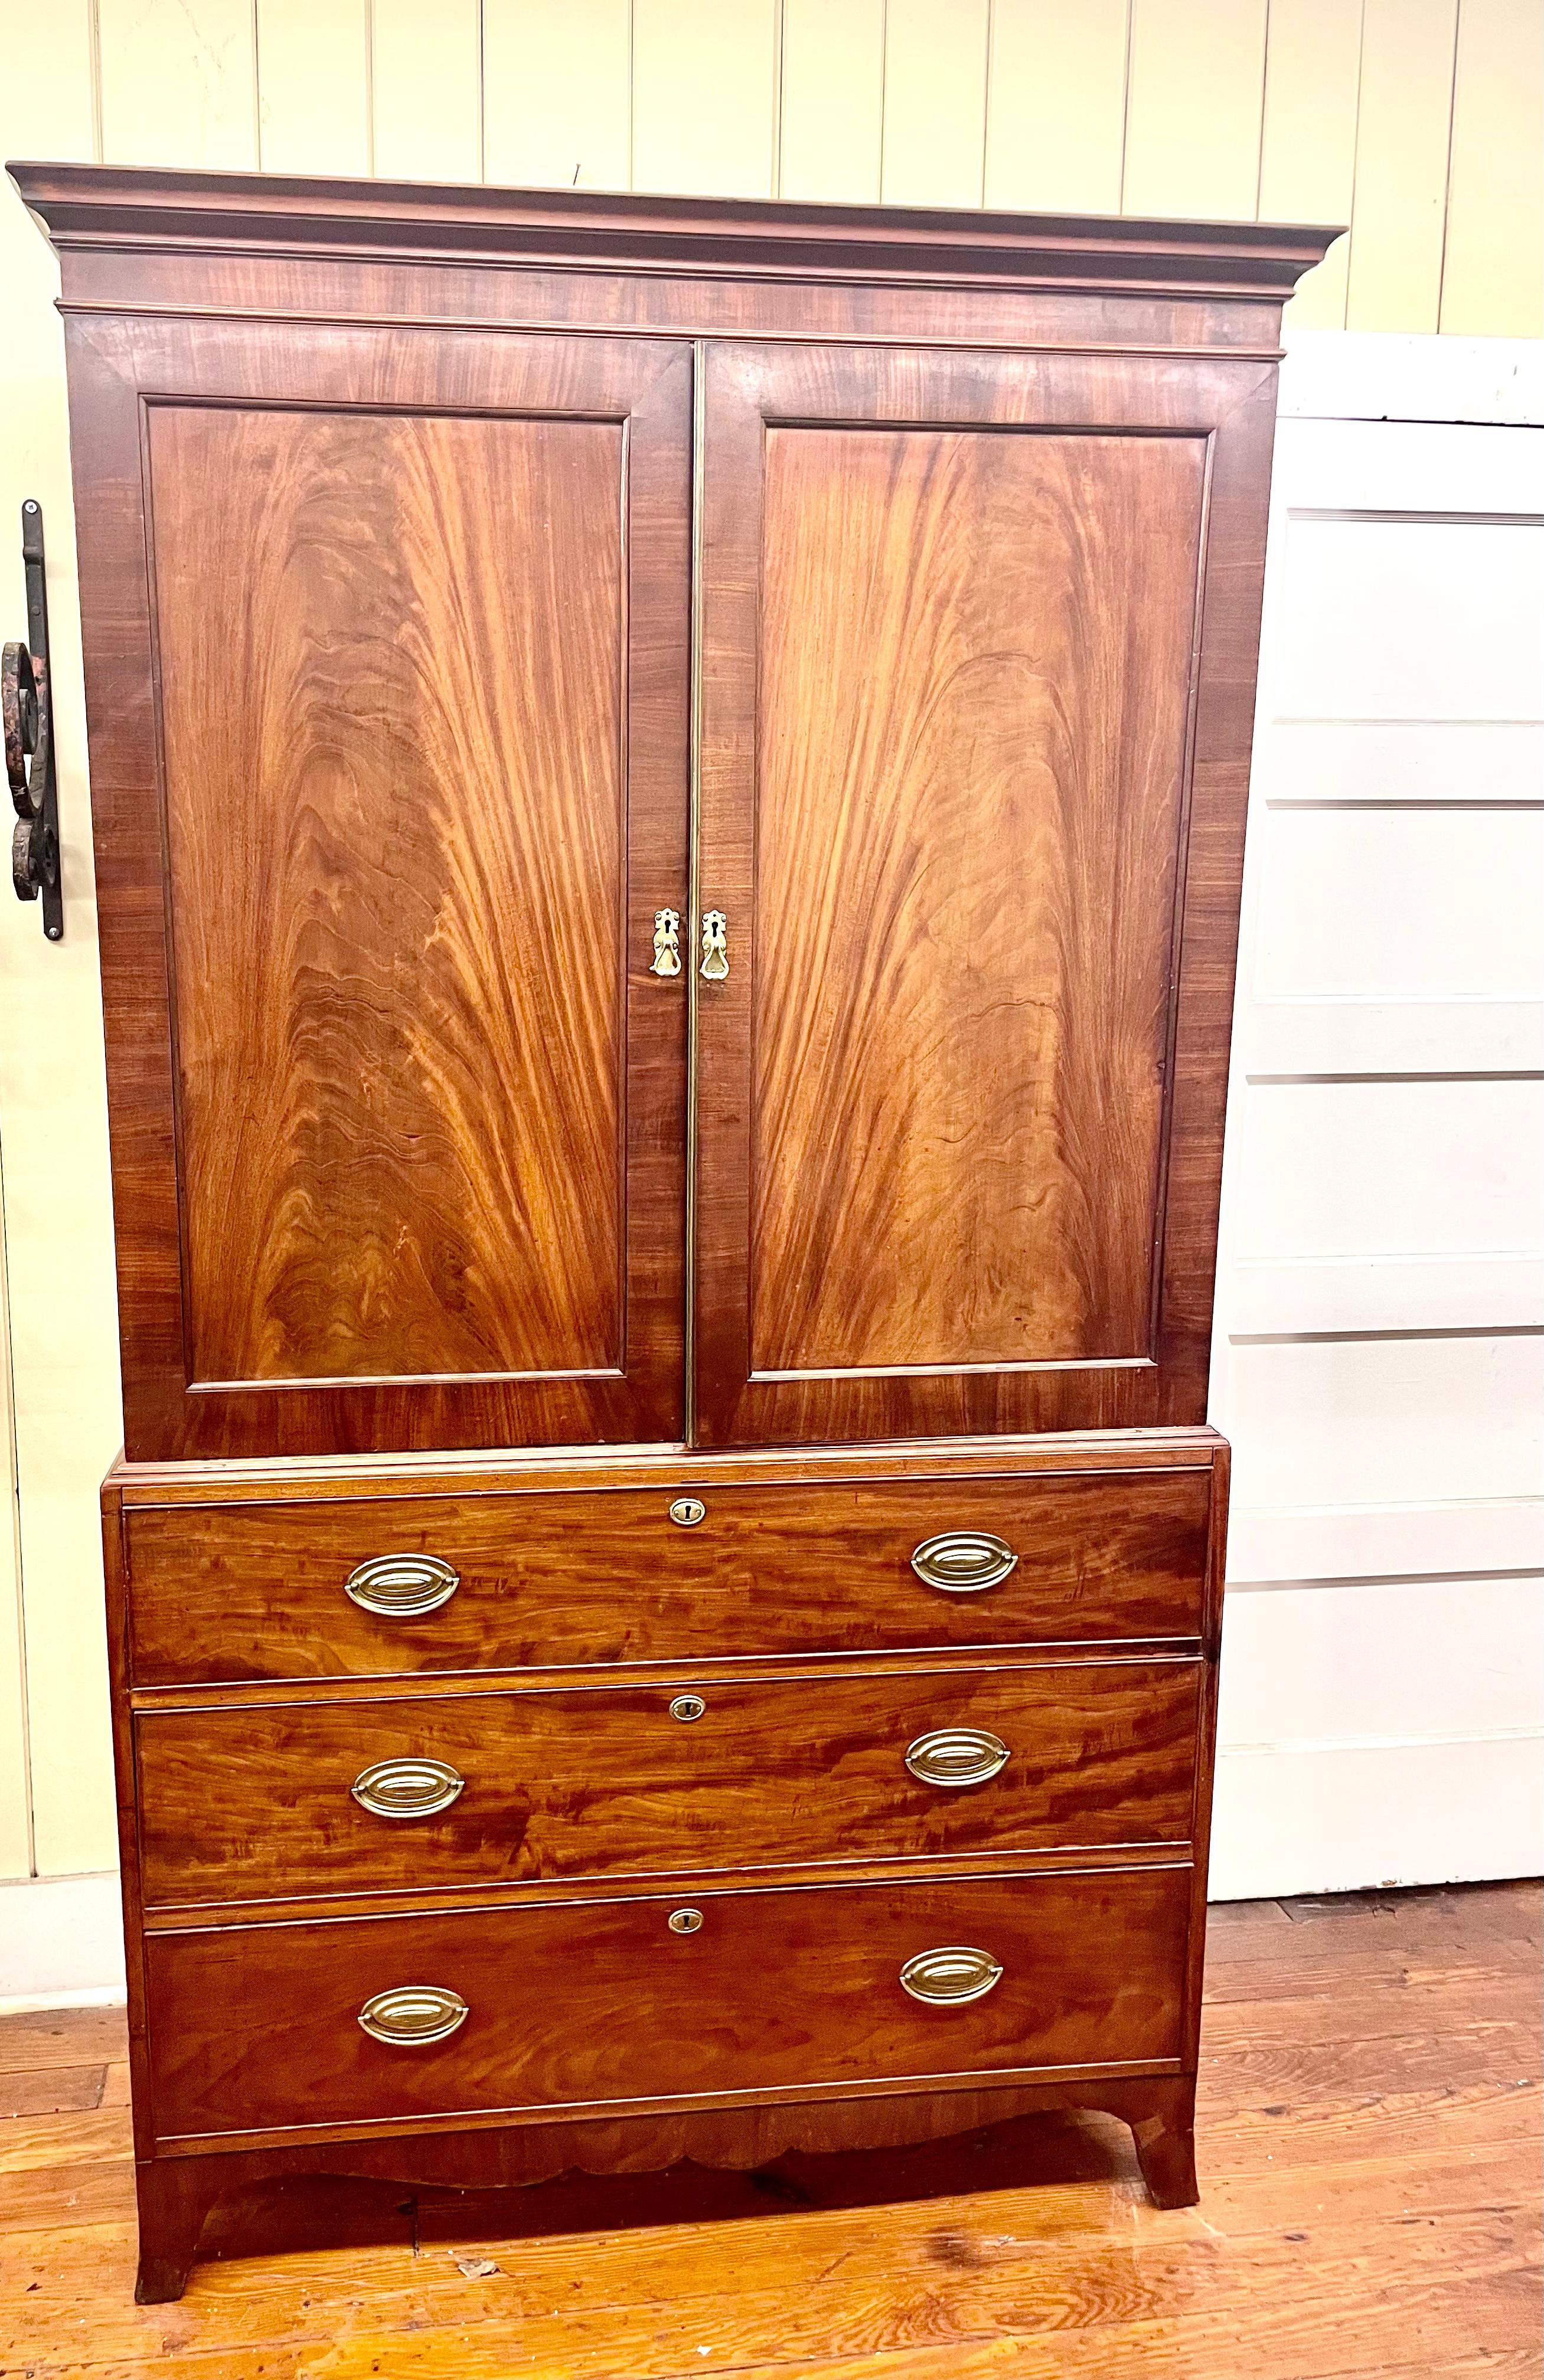 Superb quality antique English bookmatched figured mahogany Hepplewhite style linen press which retains its original interior sliding linen trays. The panelled doors are inset with gorgeous bookmatched crotch mahogany. This Linen Press is original